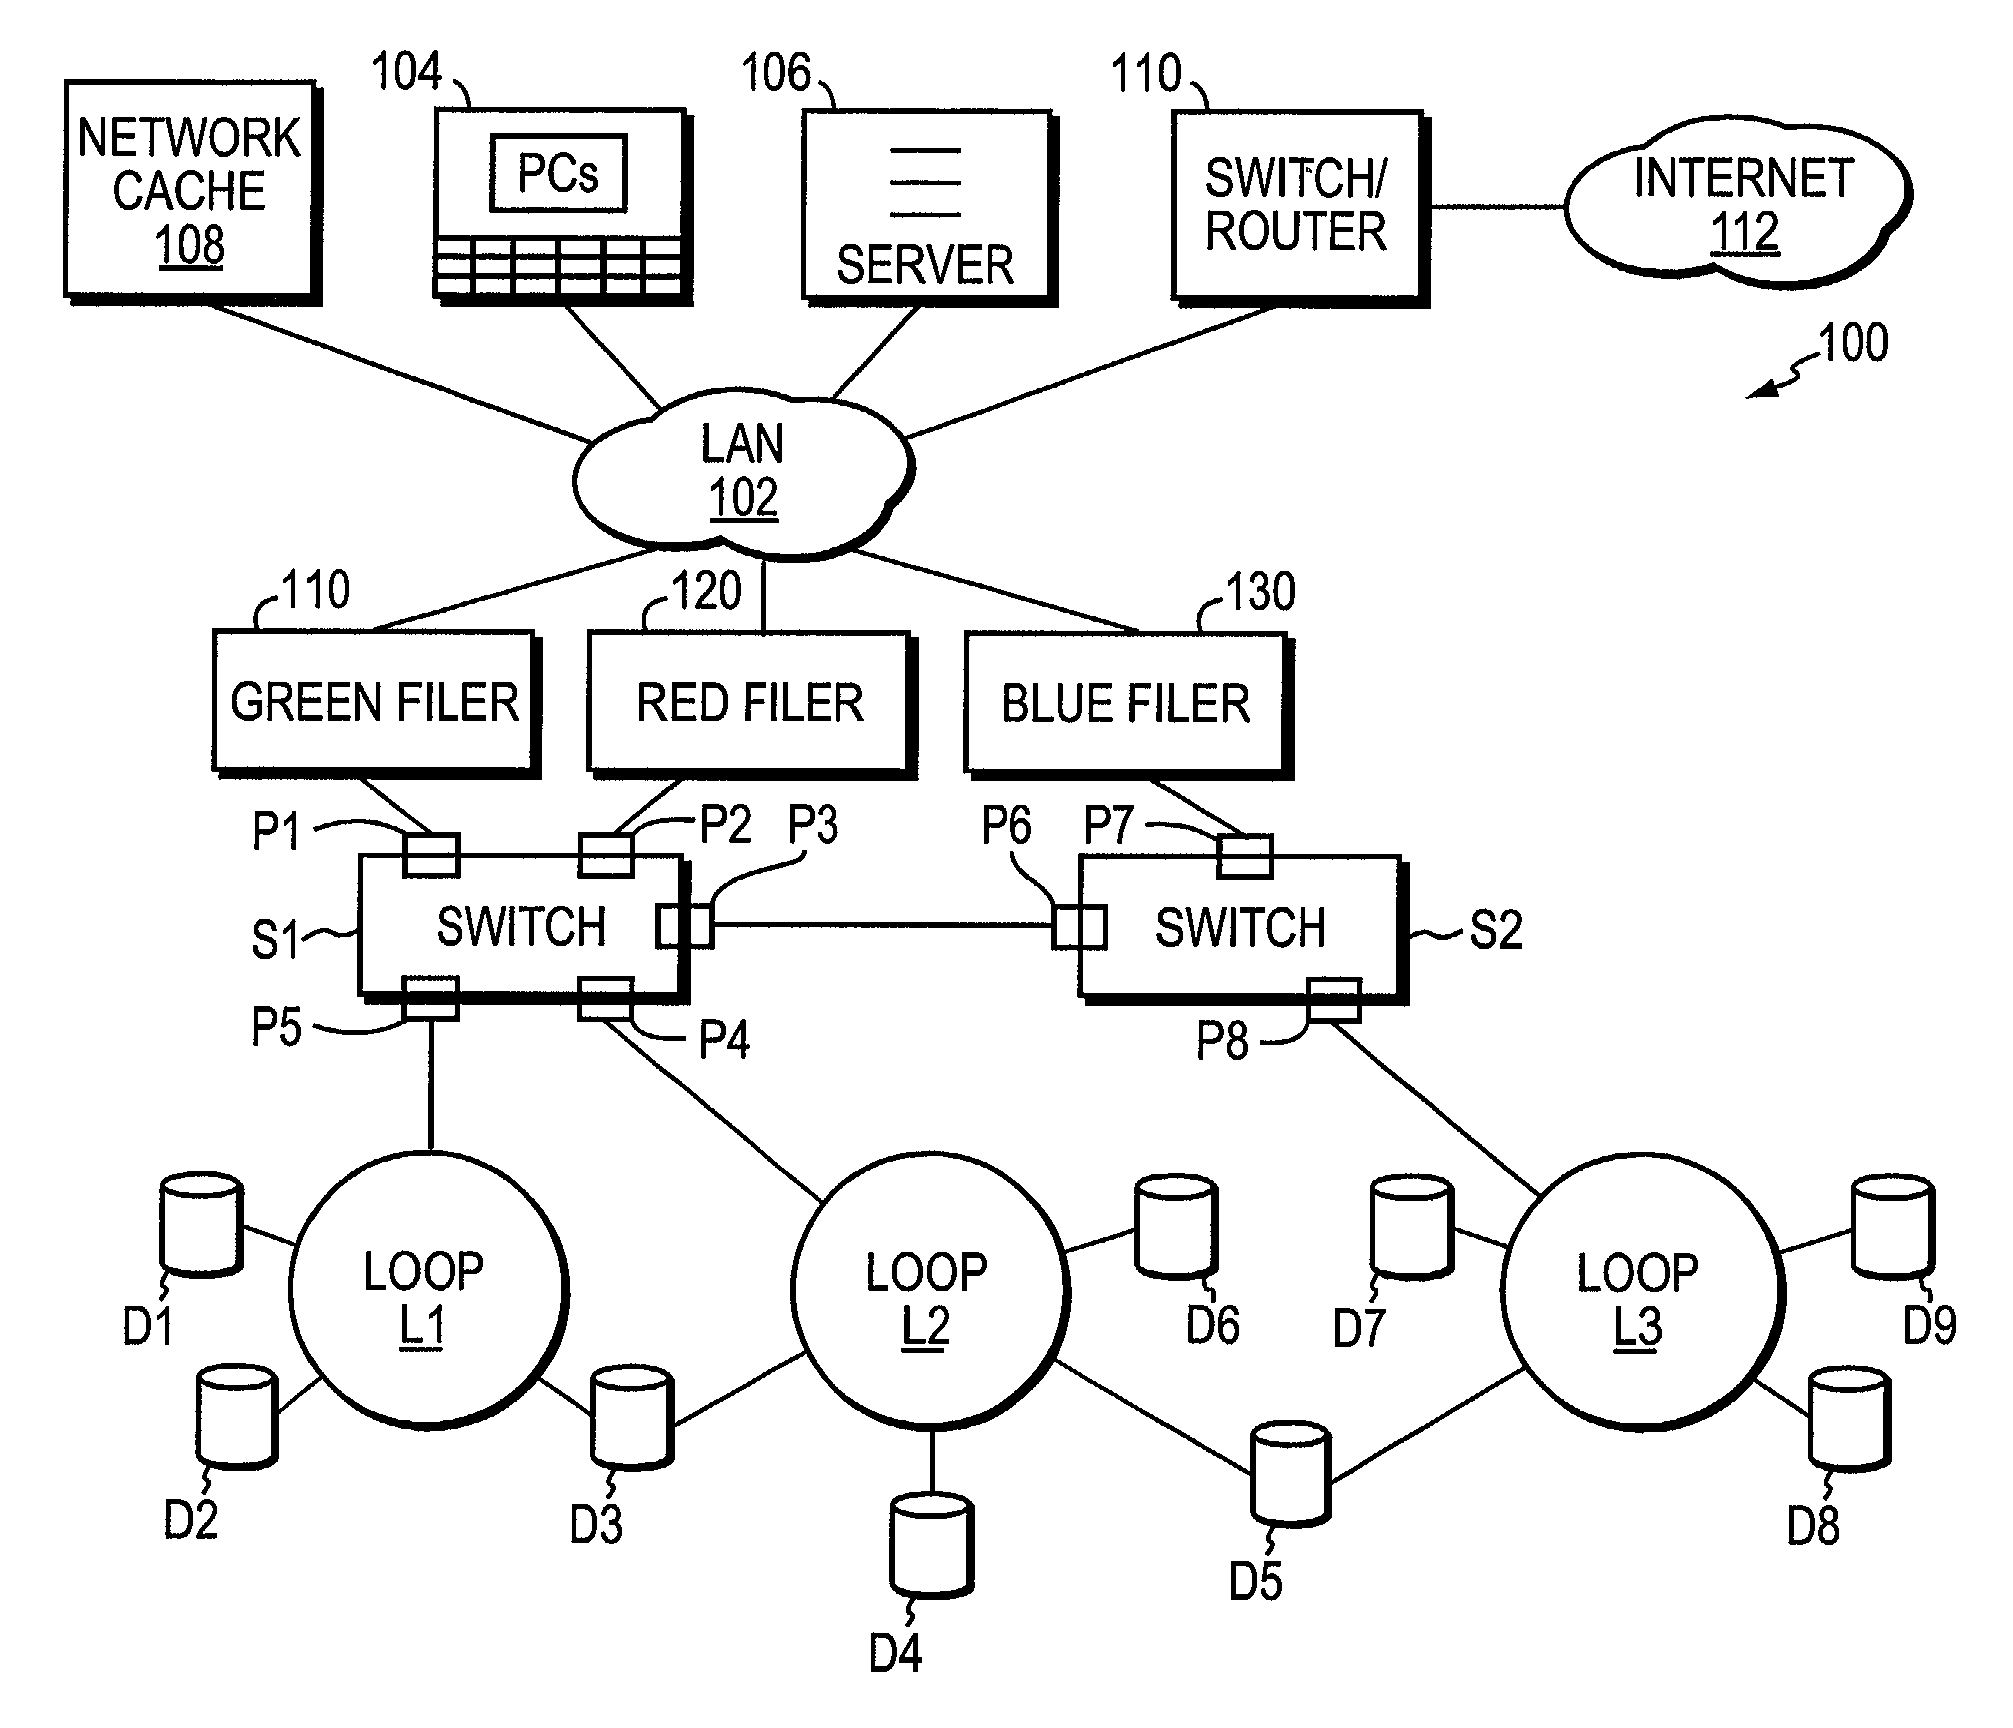 System and method for multipath I/O support for fibre channel devices